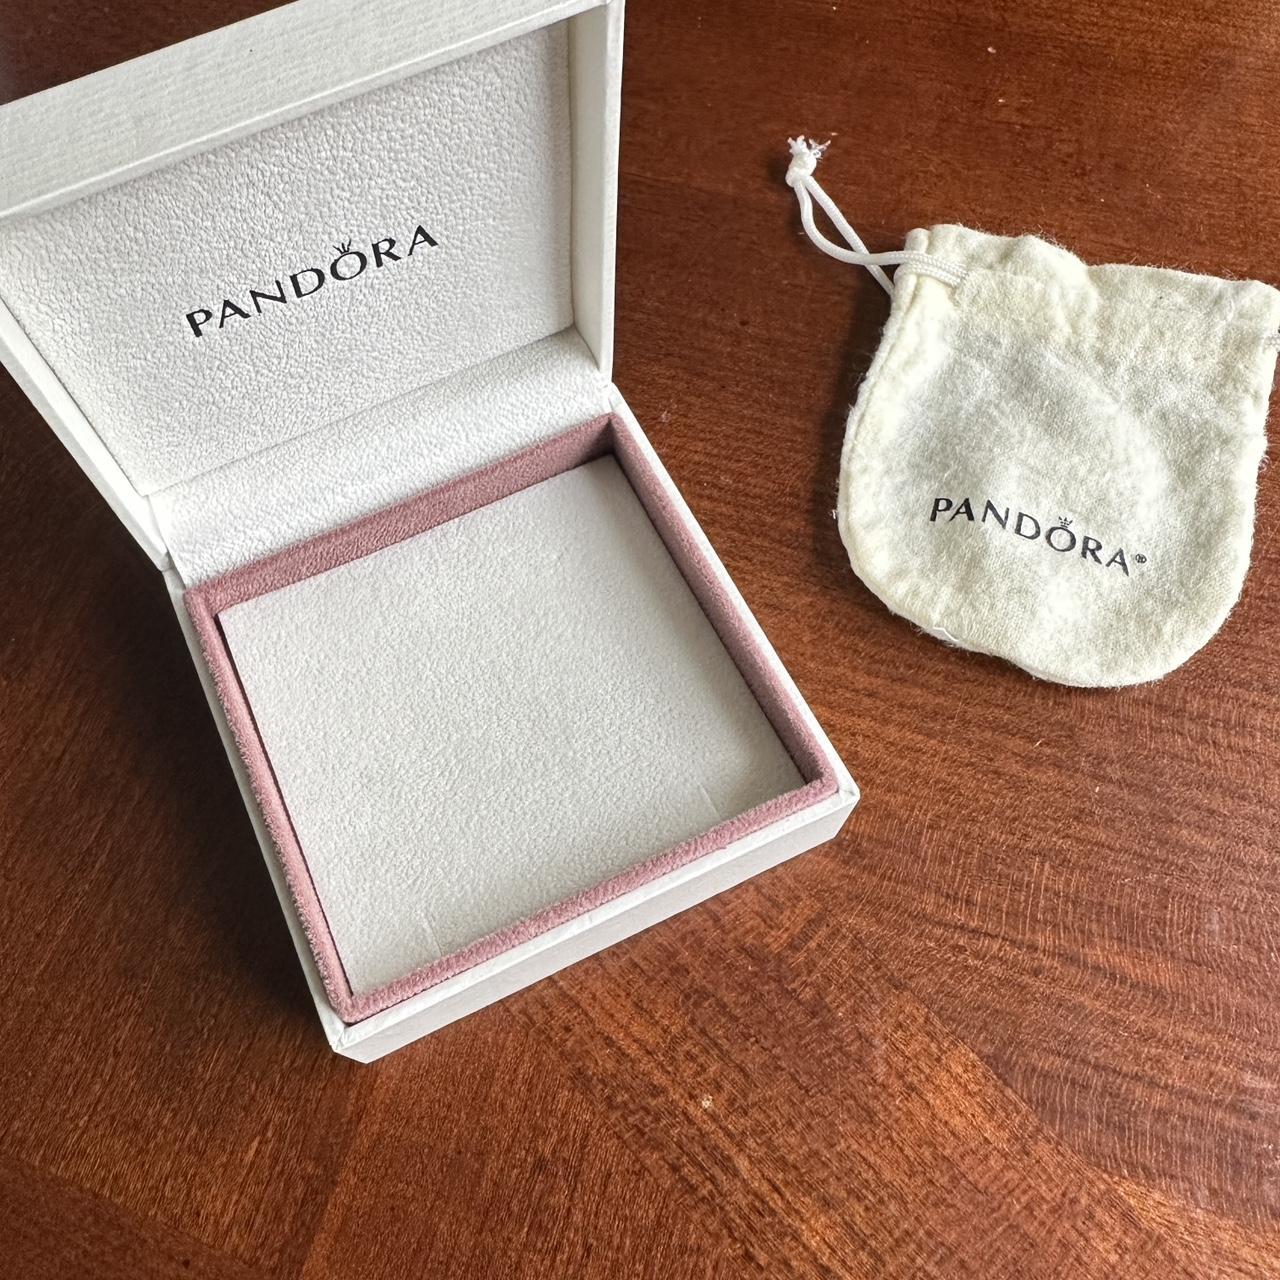 Amazon.com: Pandora's Box Vintage Alloy Locket Box with Message Inside Pendant  Necklace with 16 Inch Chain : Handmade Products